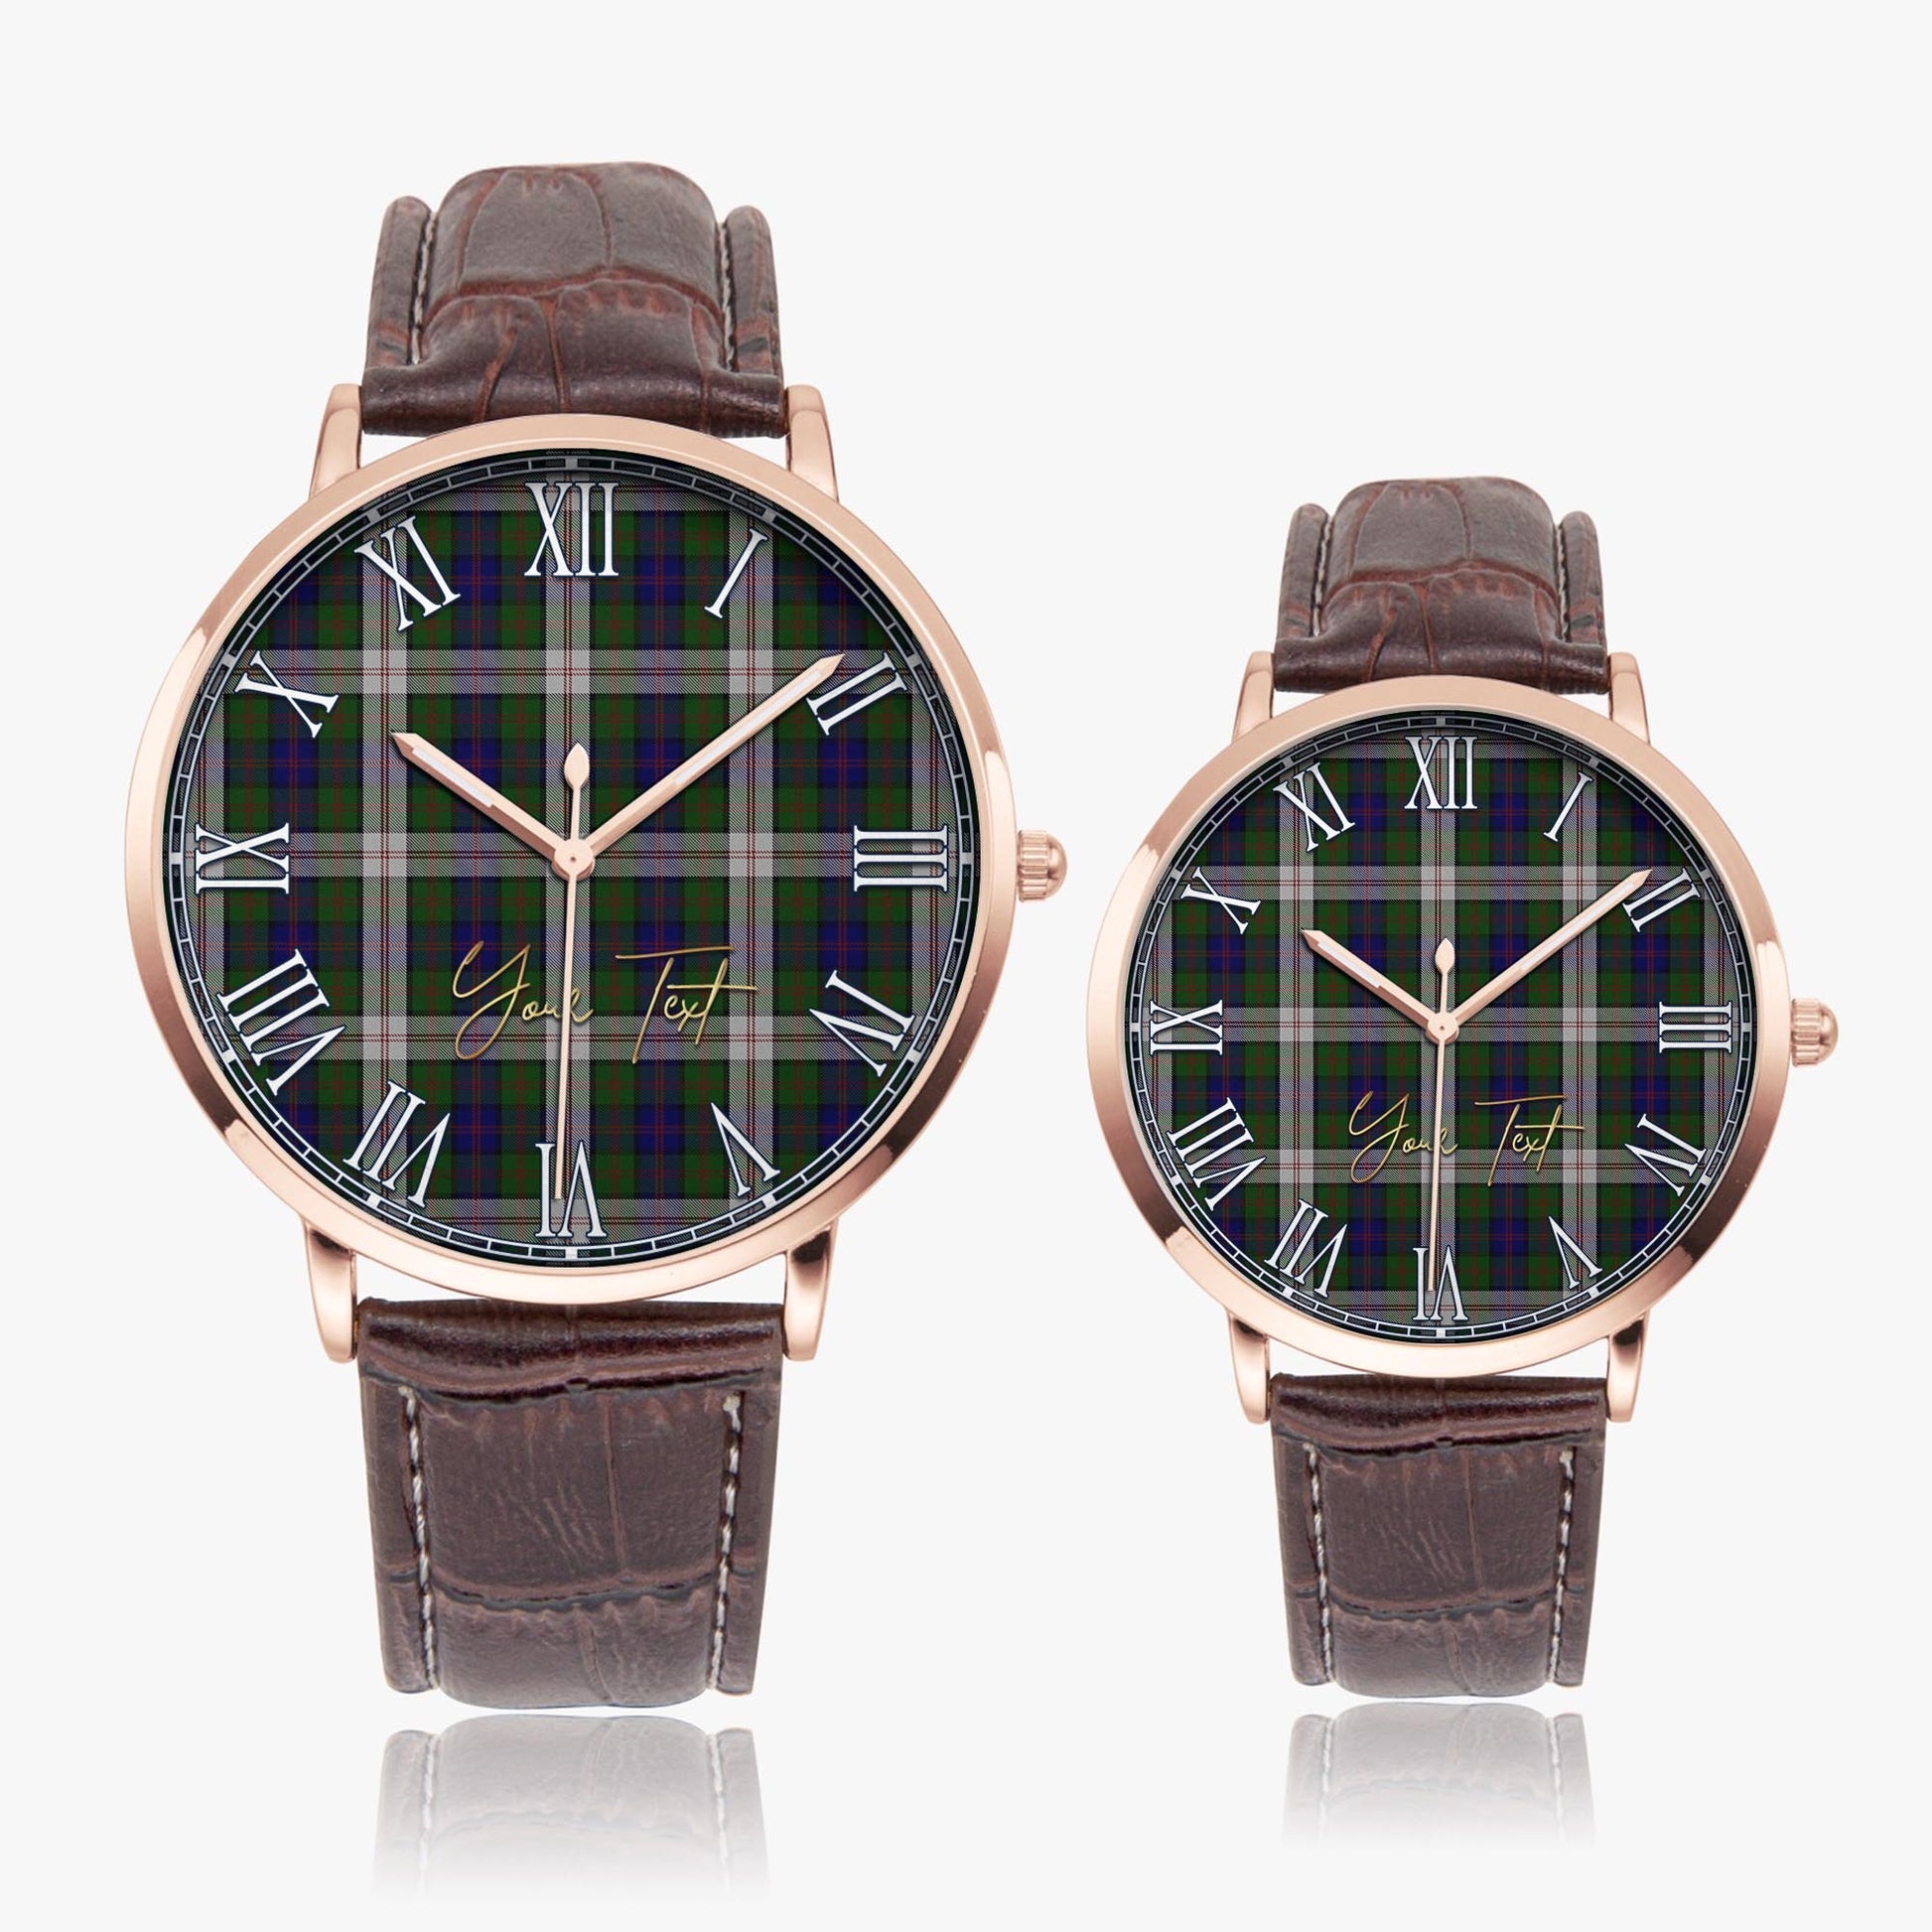 Blair Dress Tartan Personalized Your Text Leather Trap Quartz Watch Ultra Thin Rose Gold Case With Brown Leather Strap - Tartanvibesclothing